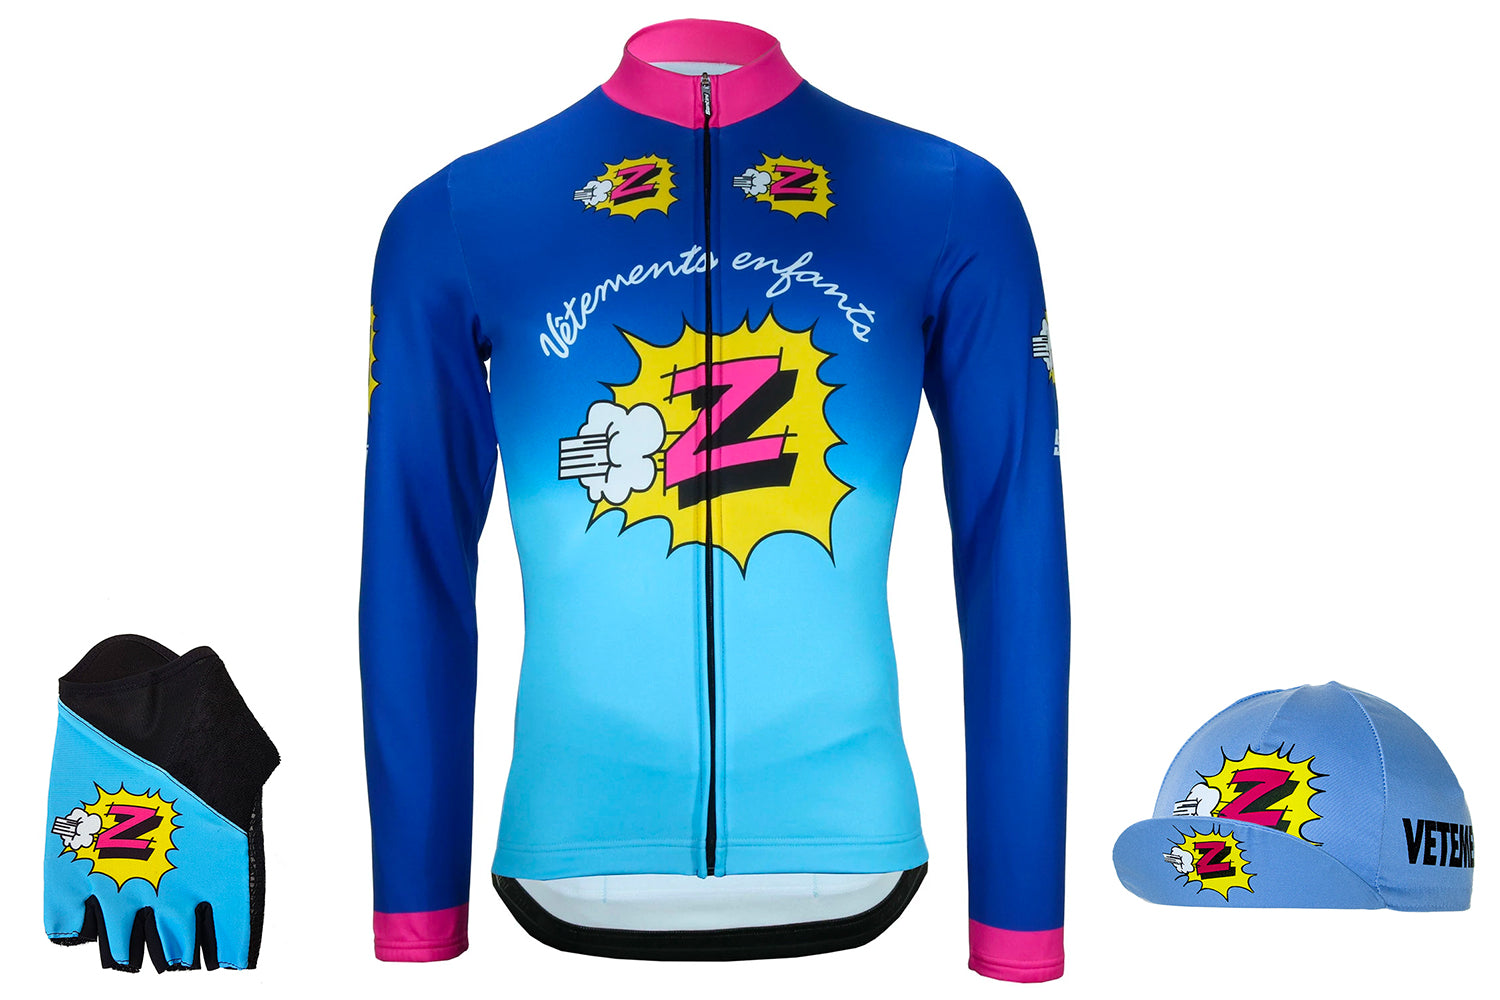 Z Retro team cycle clothing by Santini available at Prendas Ciclismo